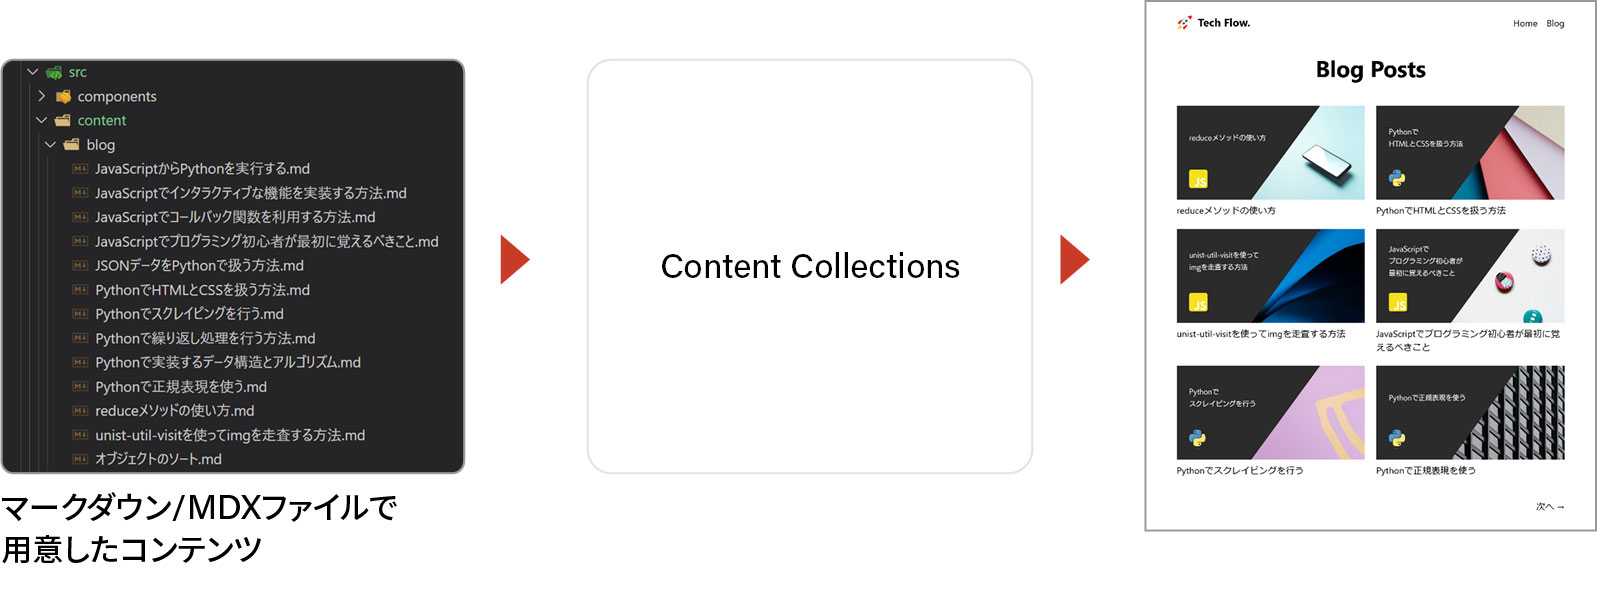 Content Collectionsを通してコンテンツを出力